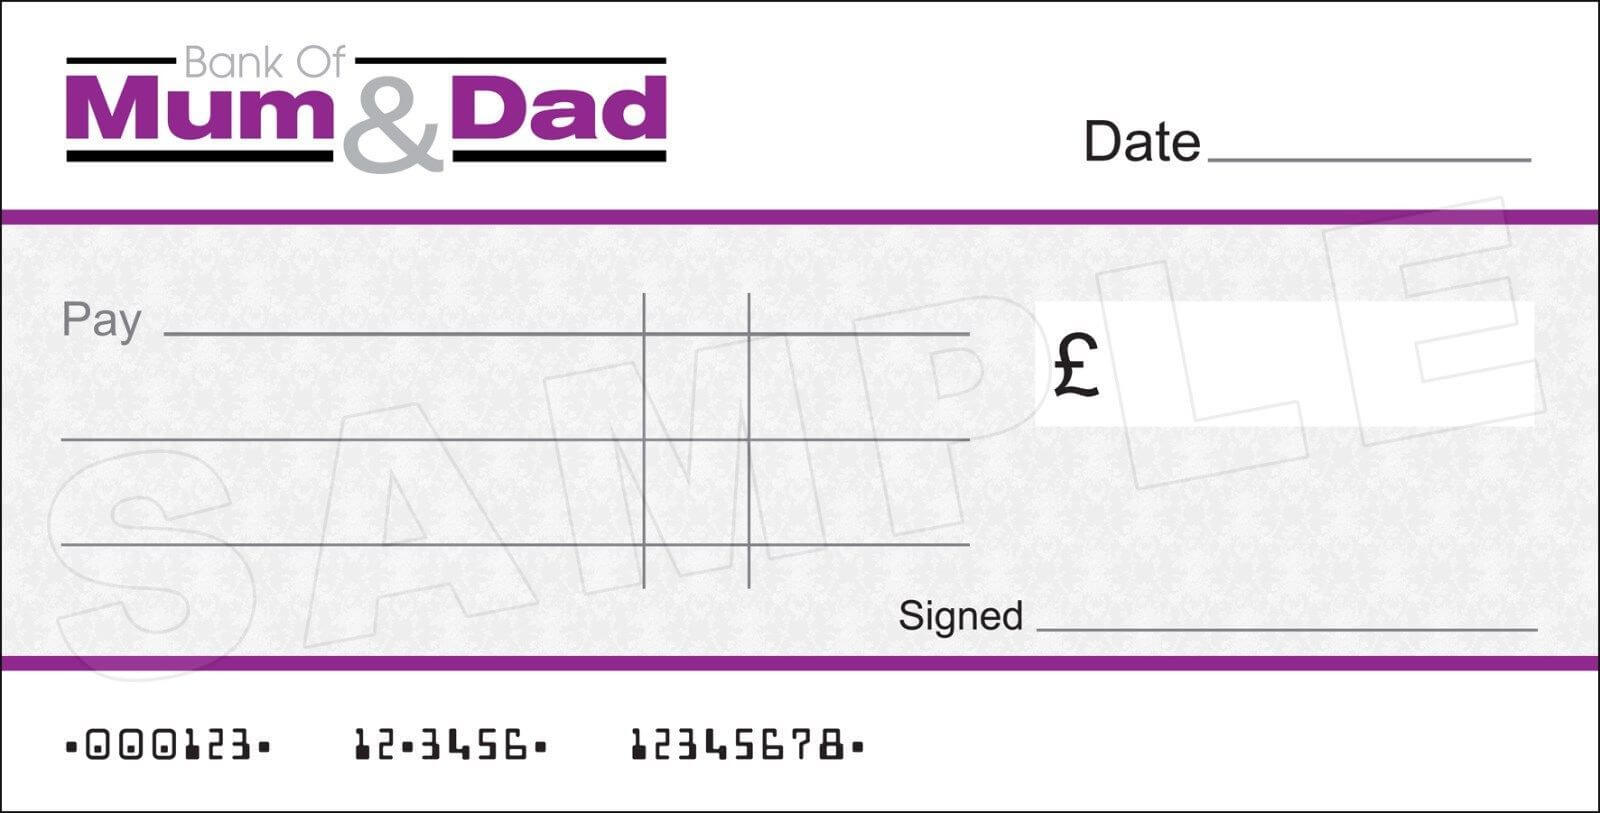 Details About Large Blank Bank Of Mum & Dad Cheque | Dads With Fun Blank Cheque Template